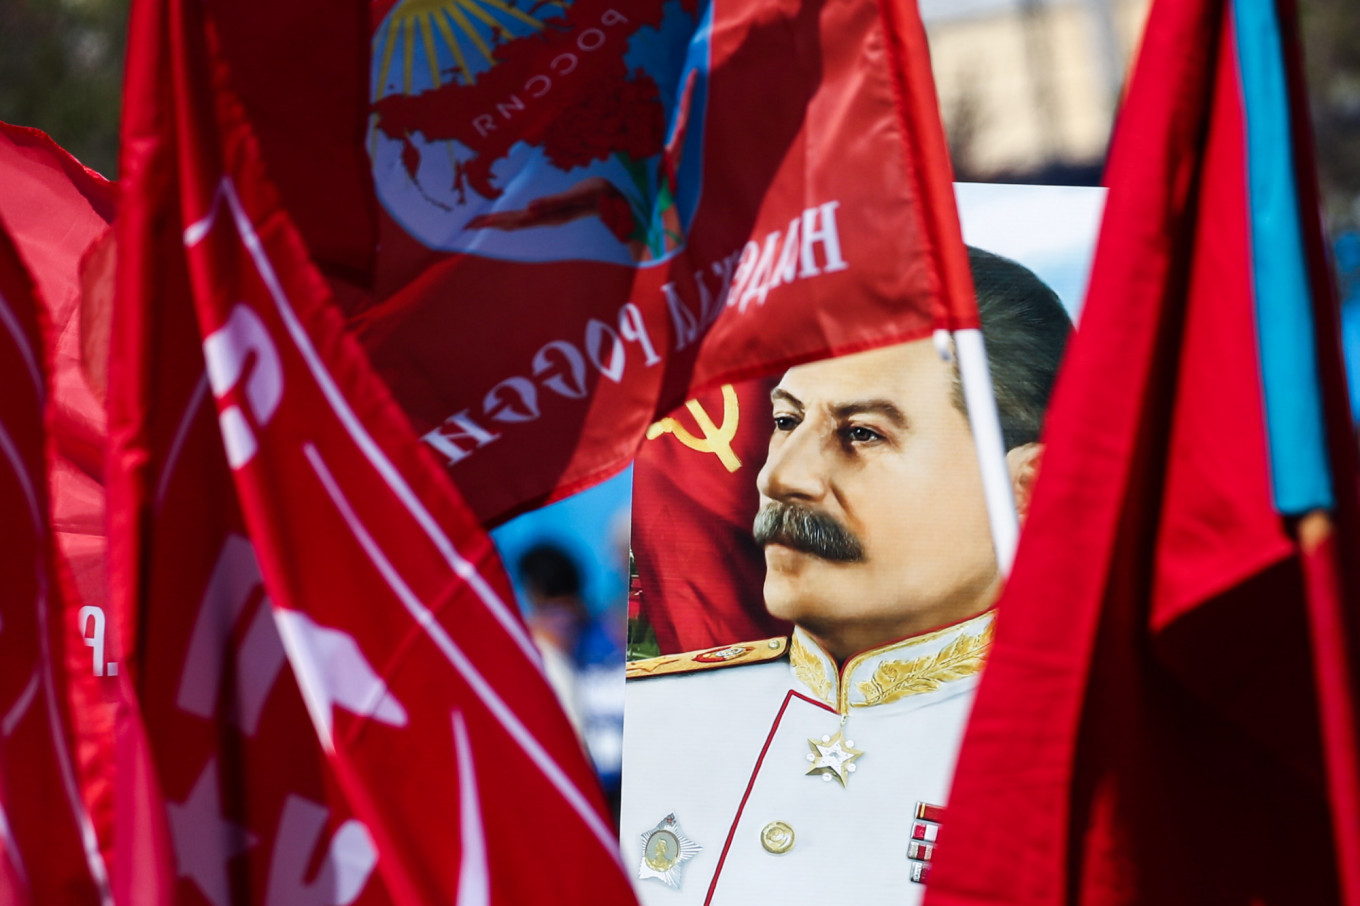 Stalin in Dress Caricature Pushes Russian Magazine Off the Shelves